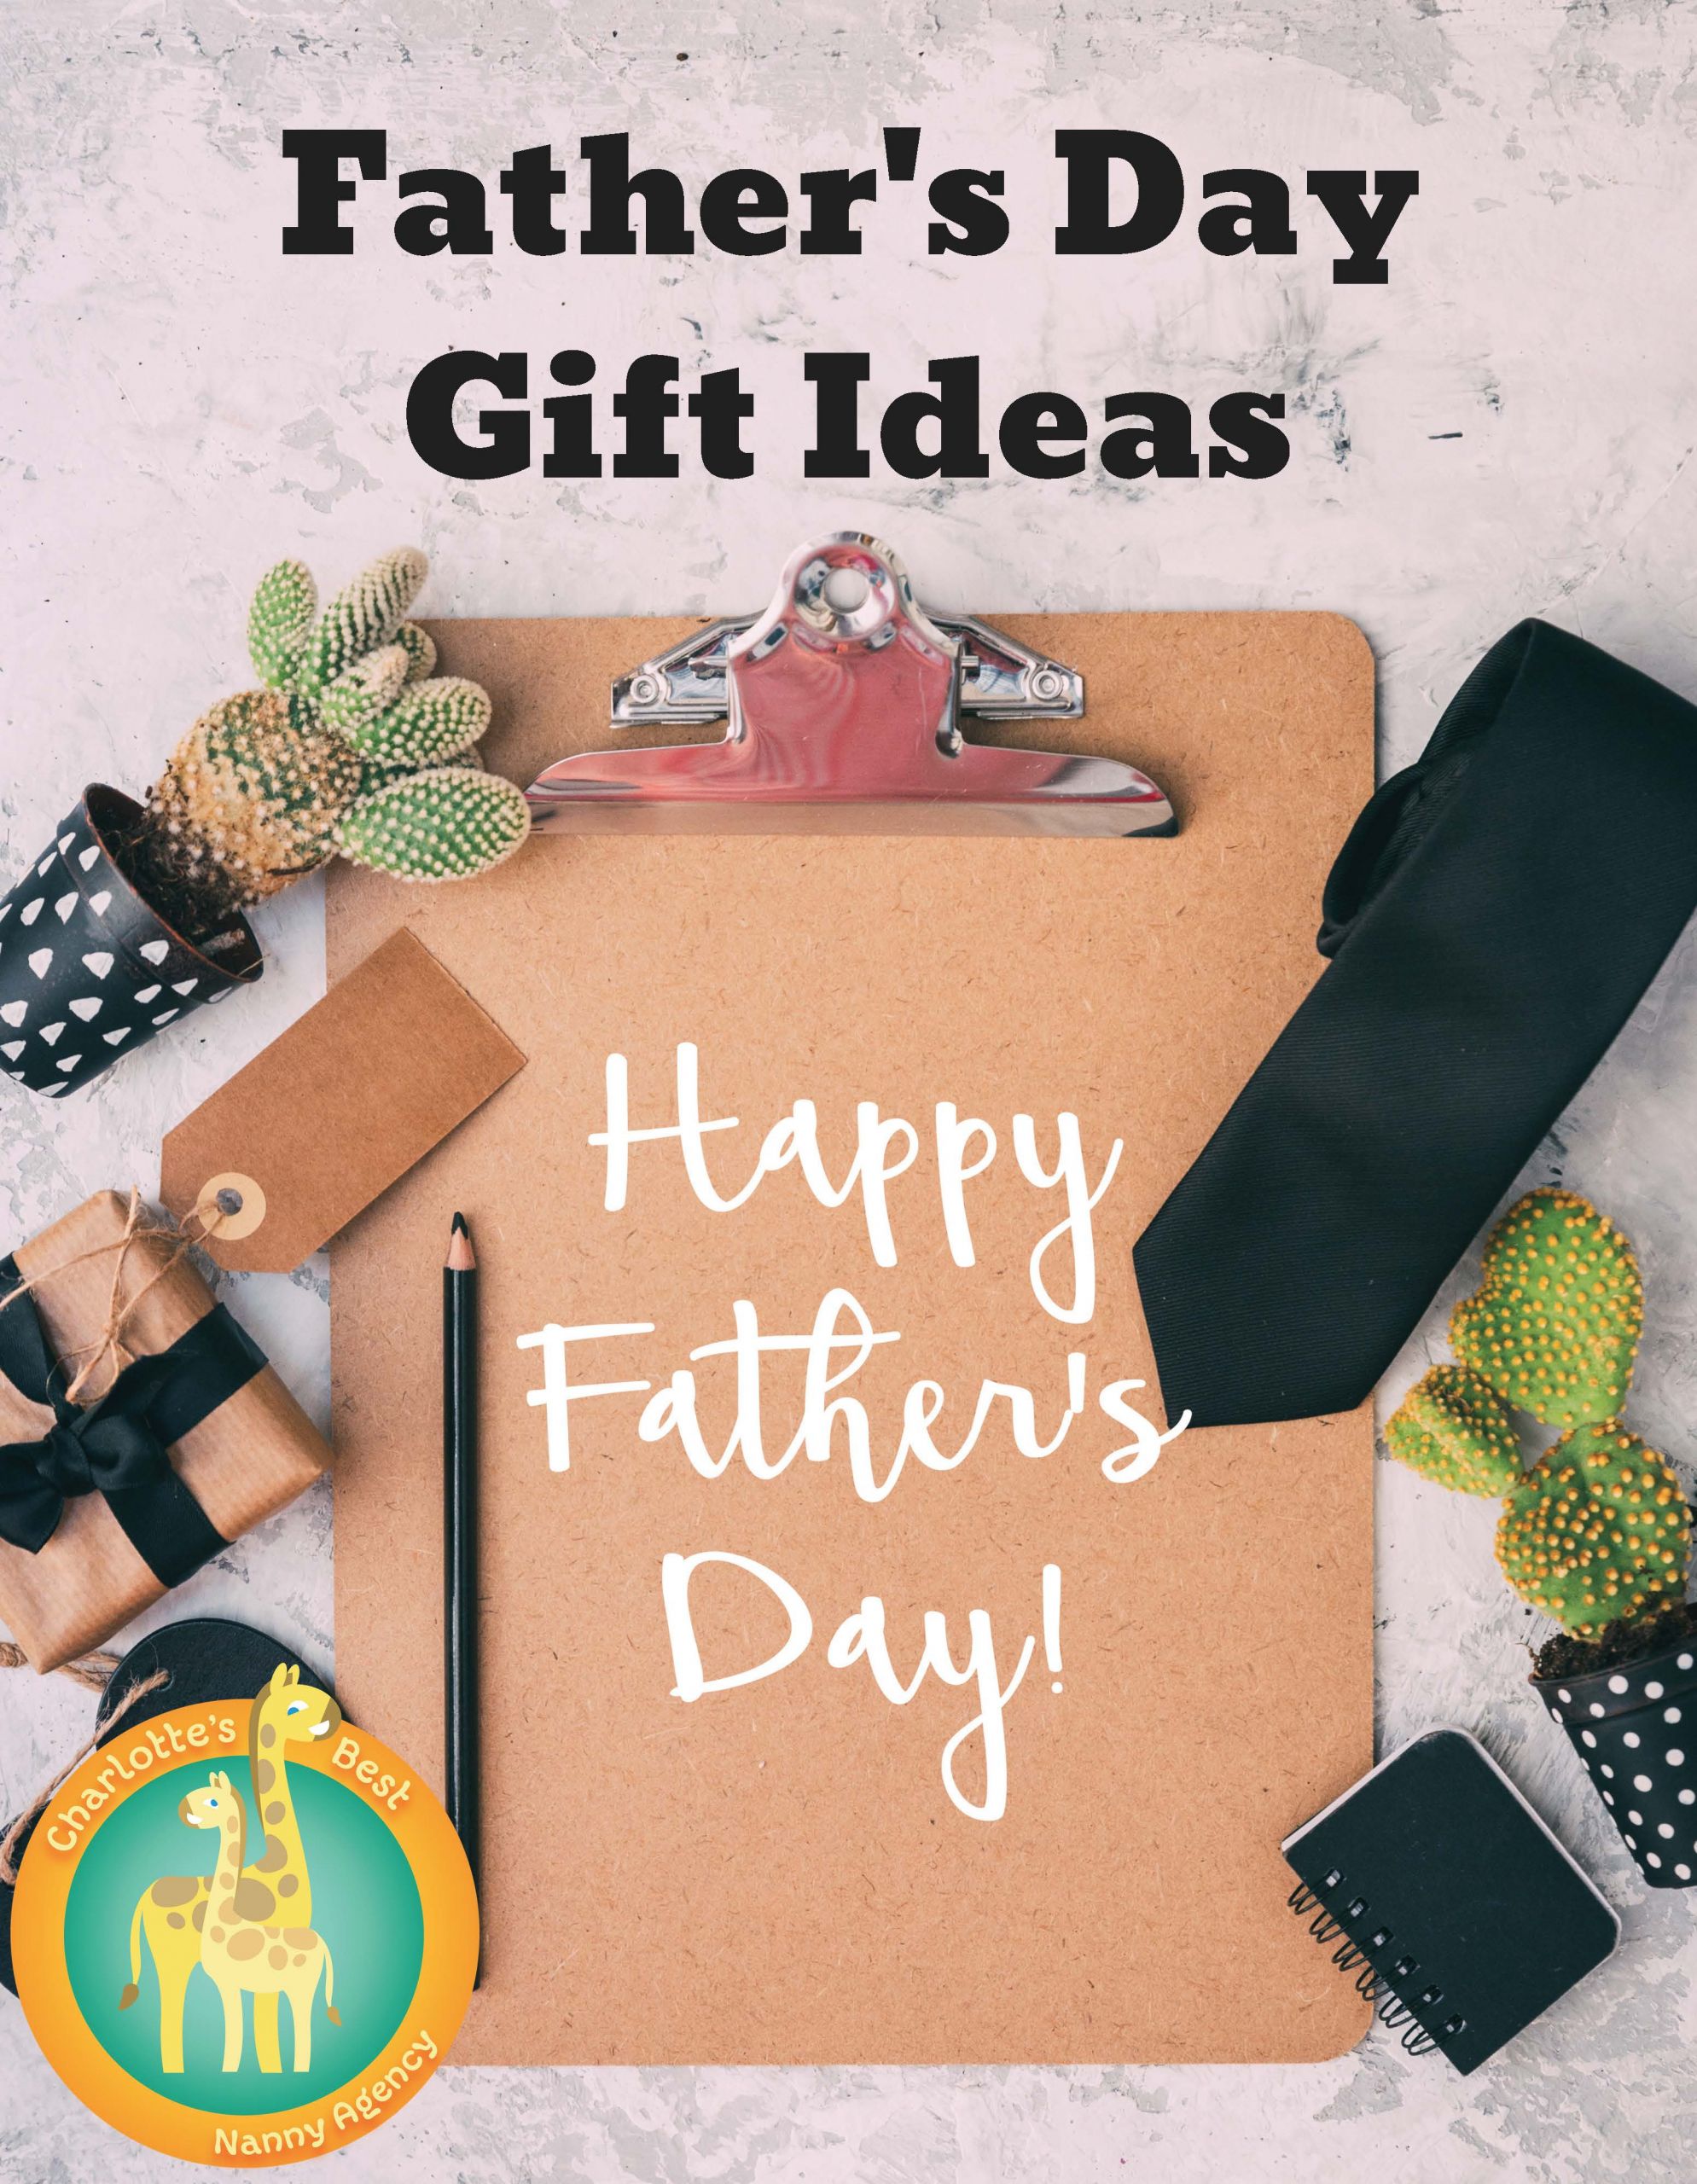 Fathersday Gift Ideas
 Father’s Day Gift Ideas Charlotte s Best Nanny Agency